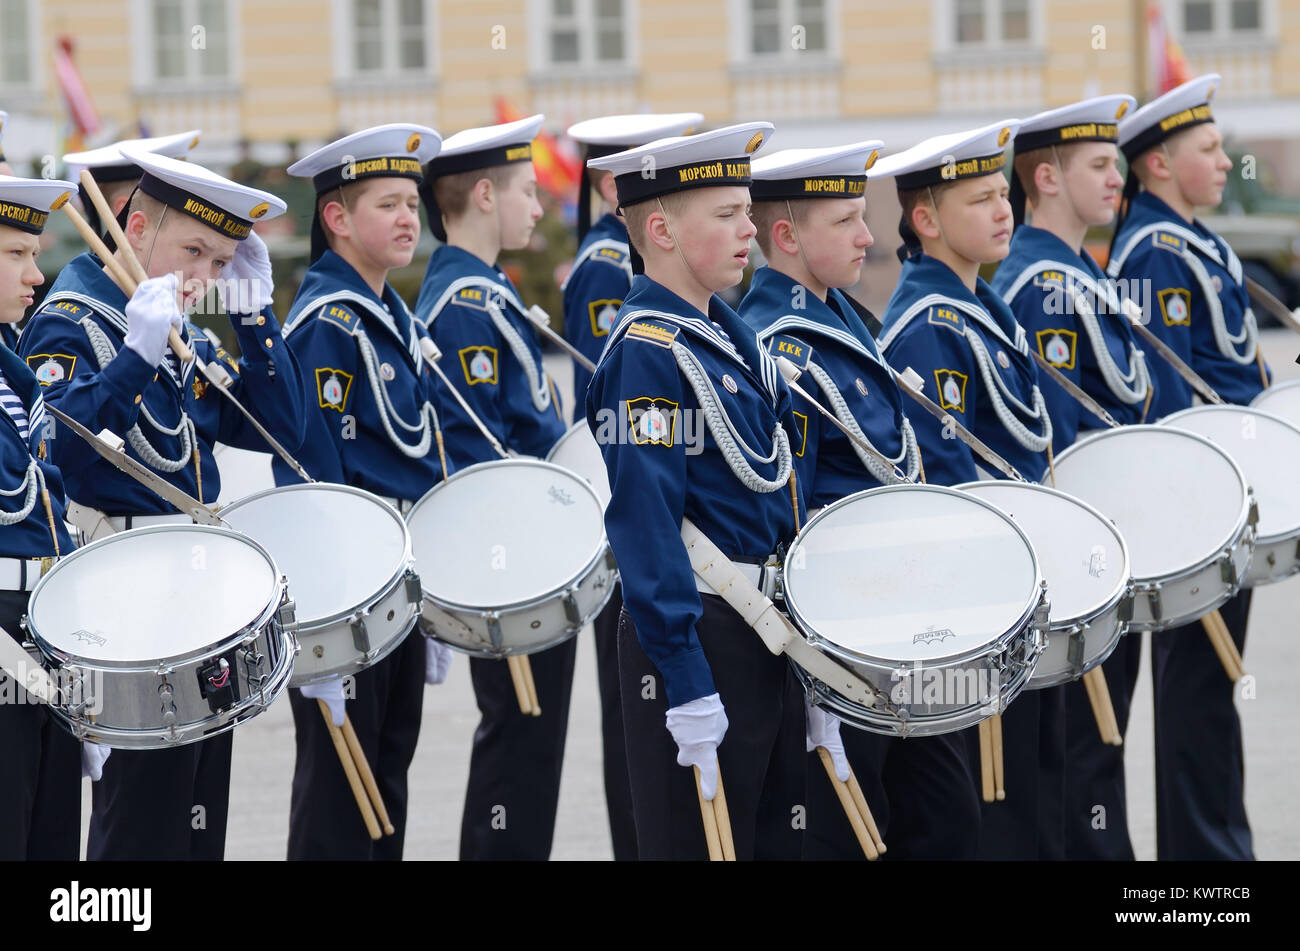 07.05.2017.Russia.Saint-Petersburg.Cadet musicians are taking part in the preparatory rehearsals for the parade on may 9,devoted to the Victory Day. Stock Photo